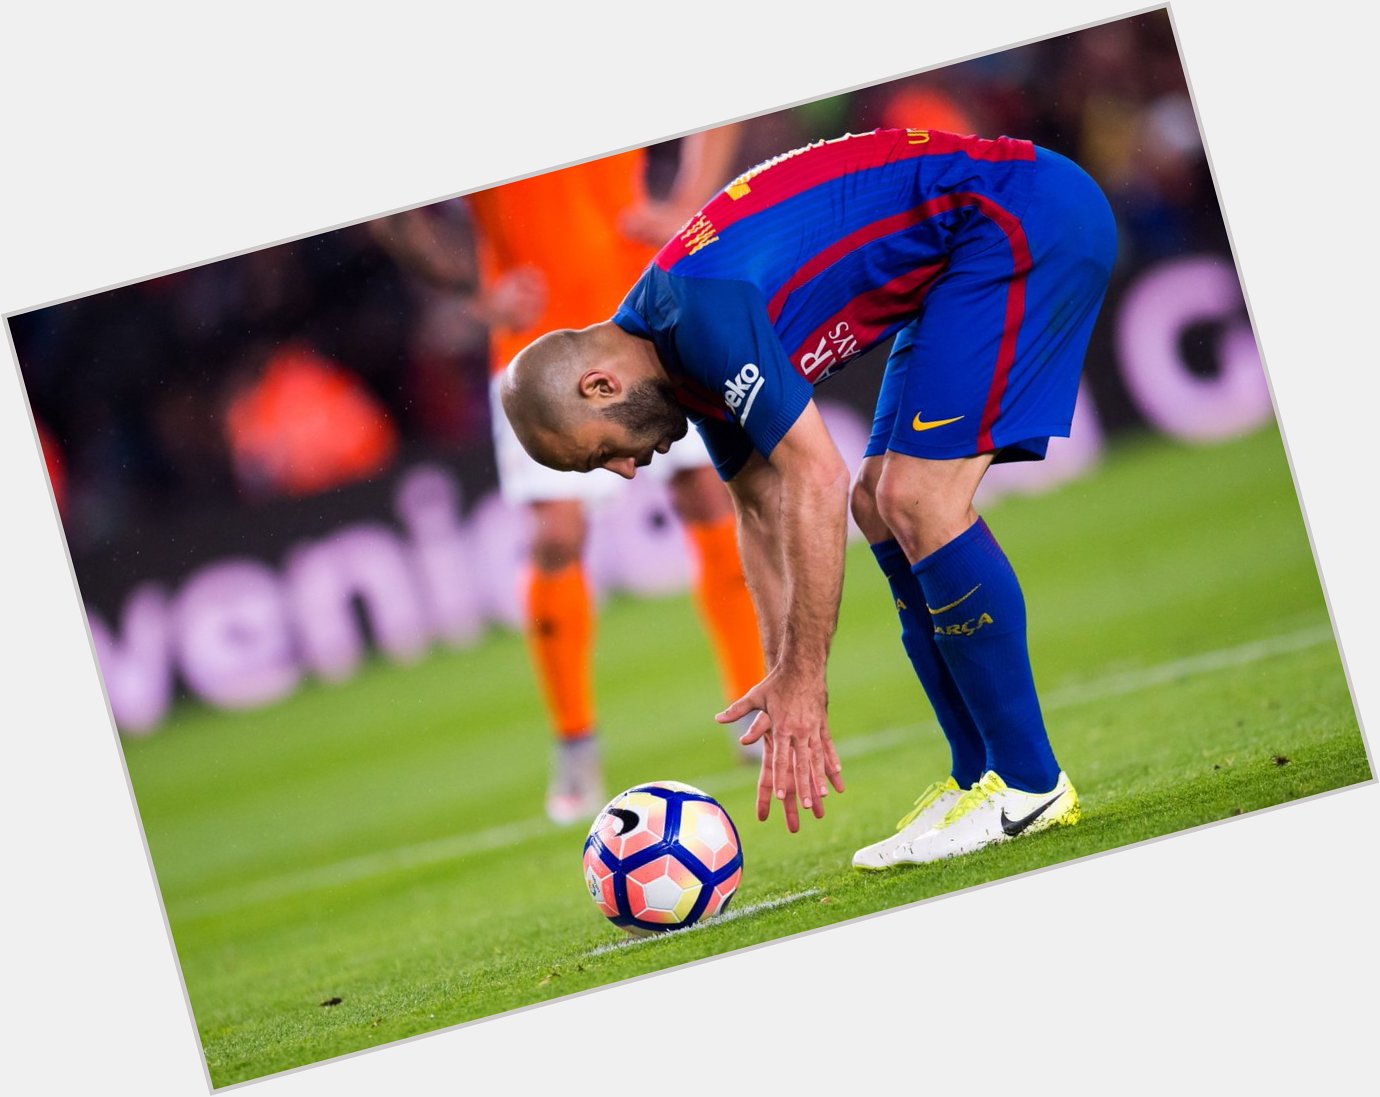 Happy 34th birthday to Javier Mascherano! 334 games for Barcelona  19 major trophies  1 goal Left a legacy!
